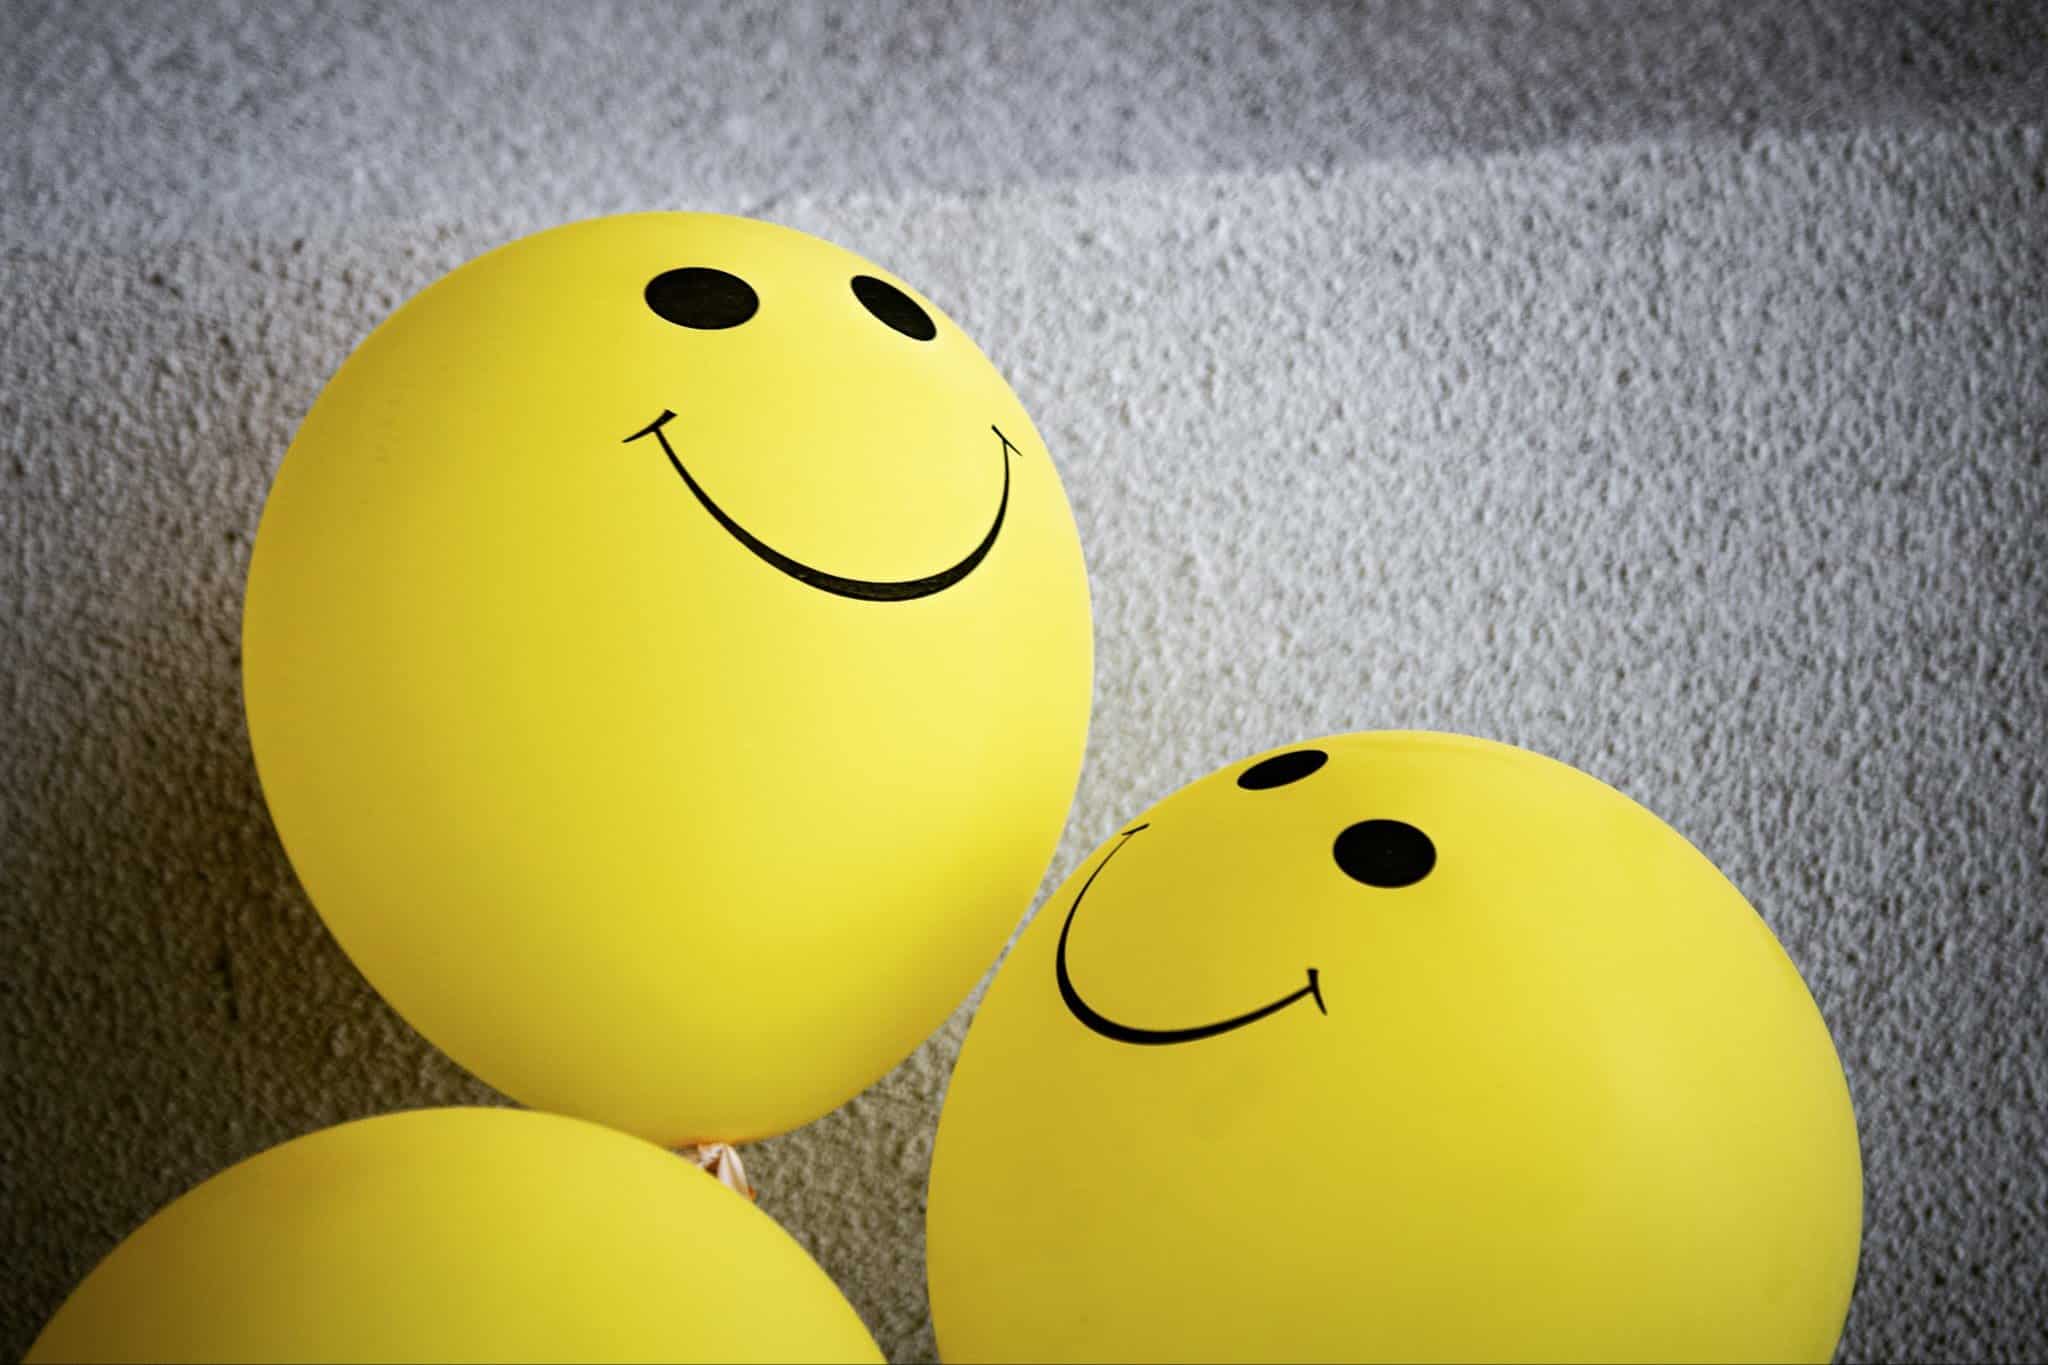 Yellow balloons with happy faces; mental health awareness.